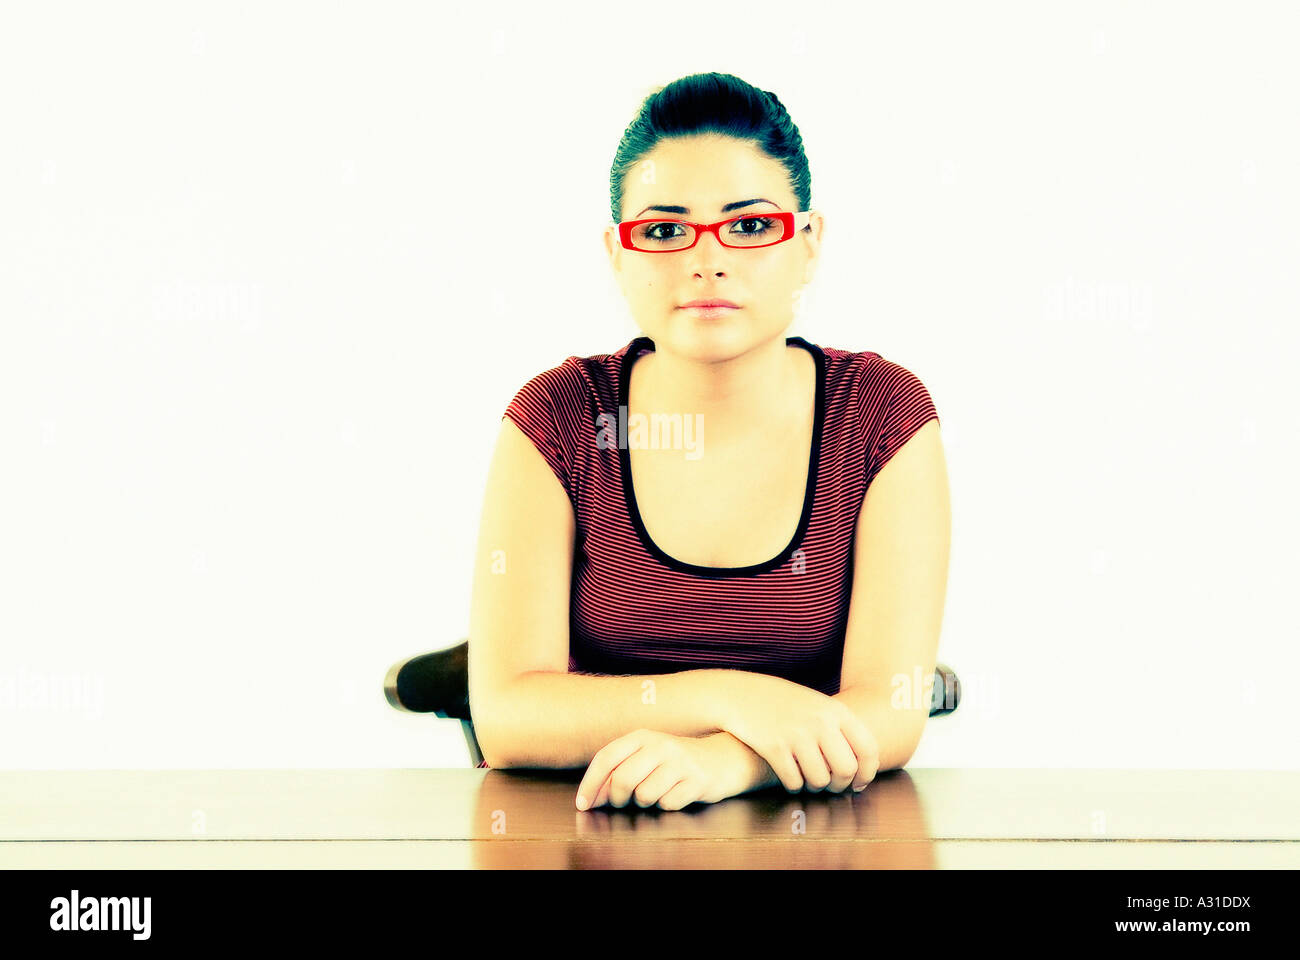 Young girl wearing glasses looking at camera Stock Photo